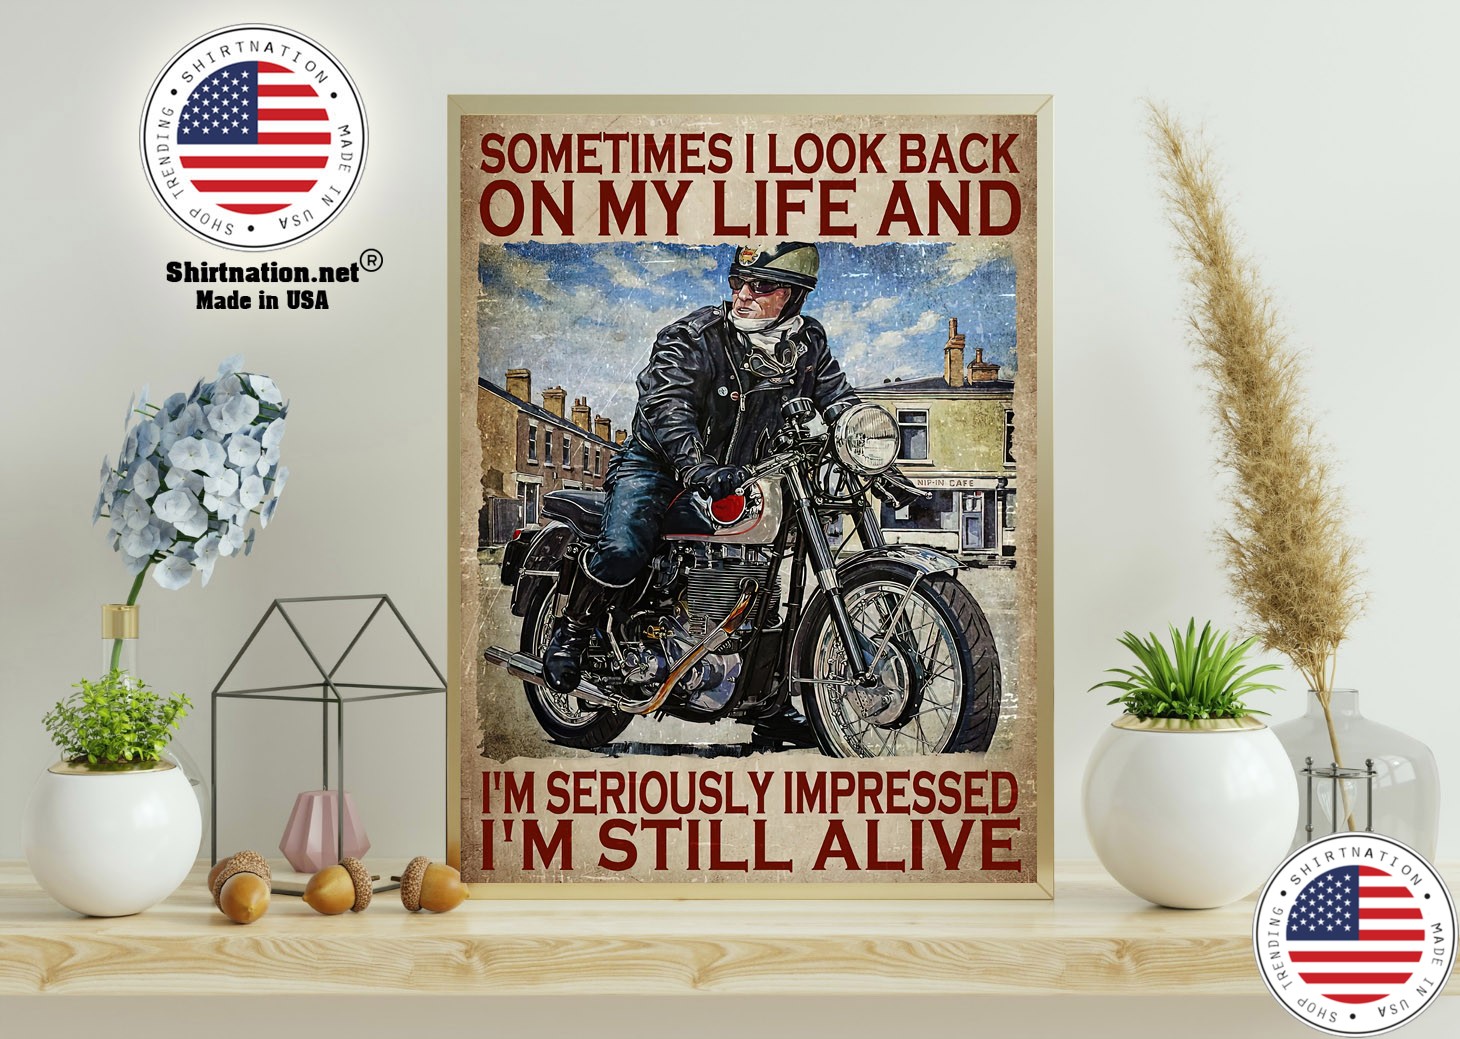 Motorcycles man Sometimes I look back on my life and Im seriously impressed Im still alive poster 11